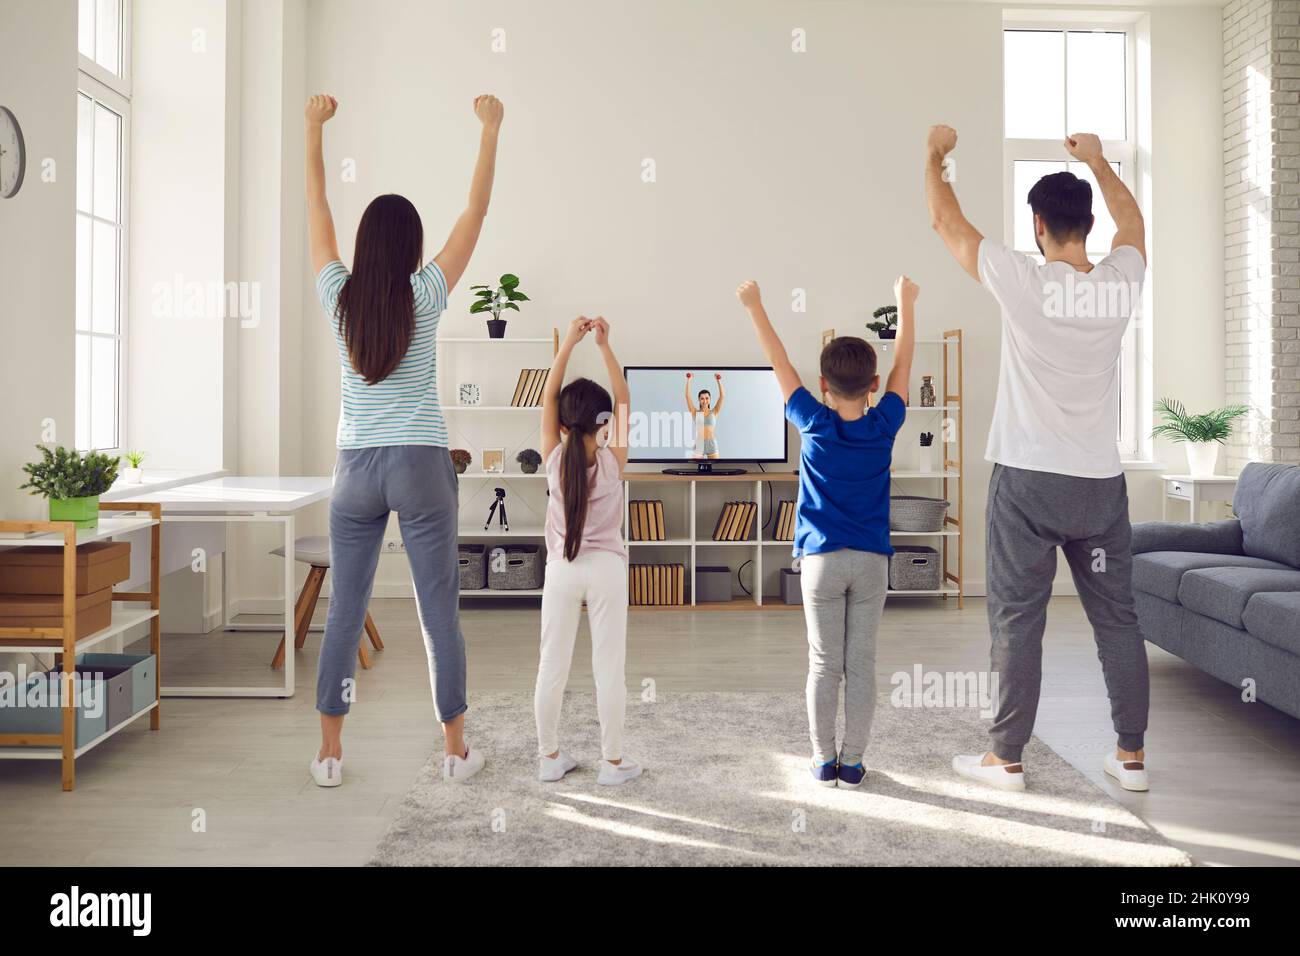 Family watching a workout video lesson on TV and doing fitness exercises together Stock Photo